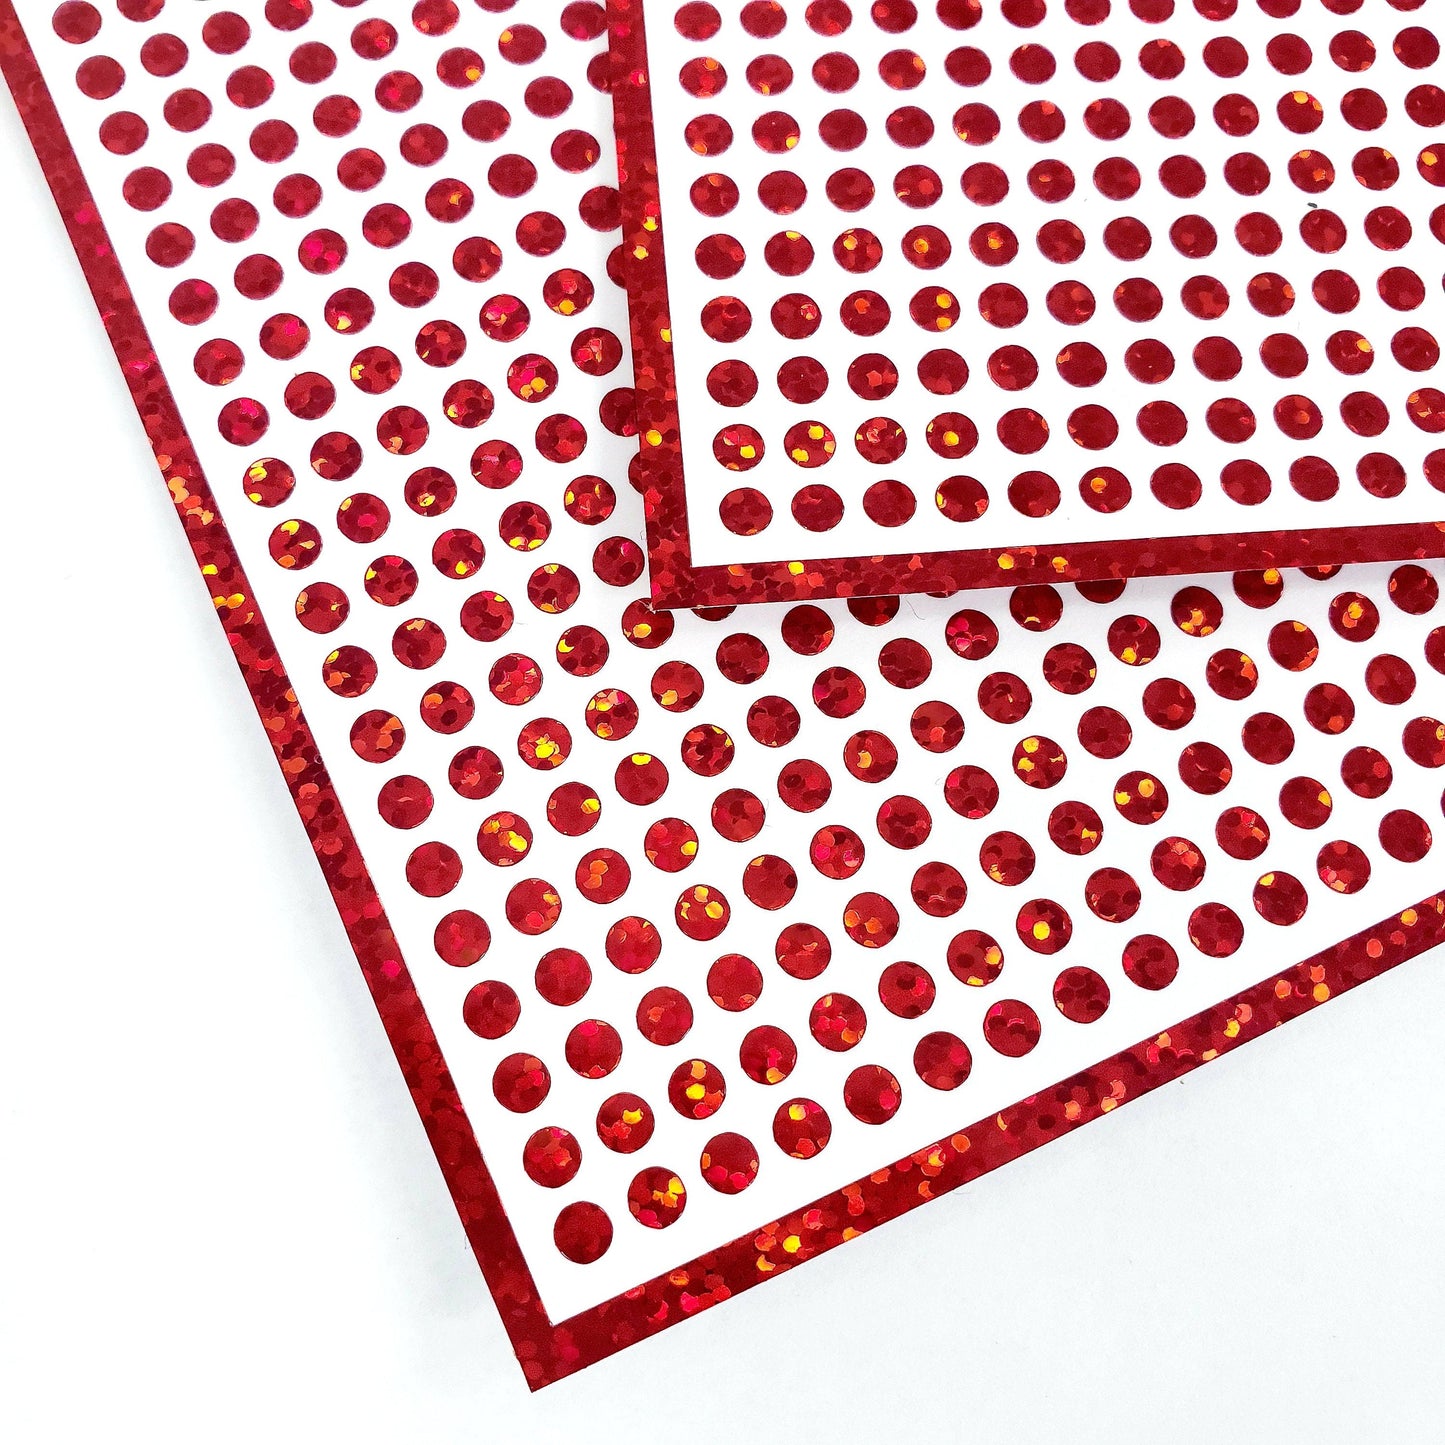 Extra Small Red Glitter Dot Stickers. Set of 750 micro sized red dots for daily journals, planners, period trackers, calendars and crafts.